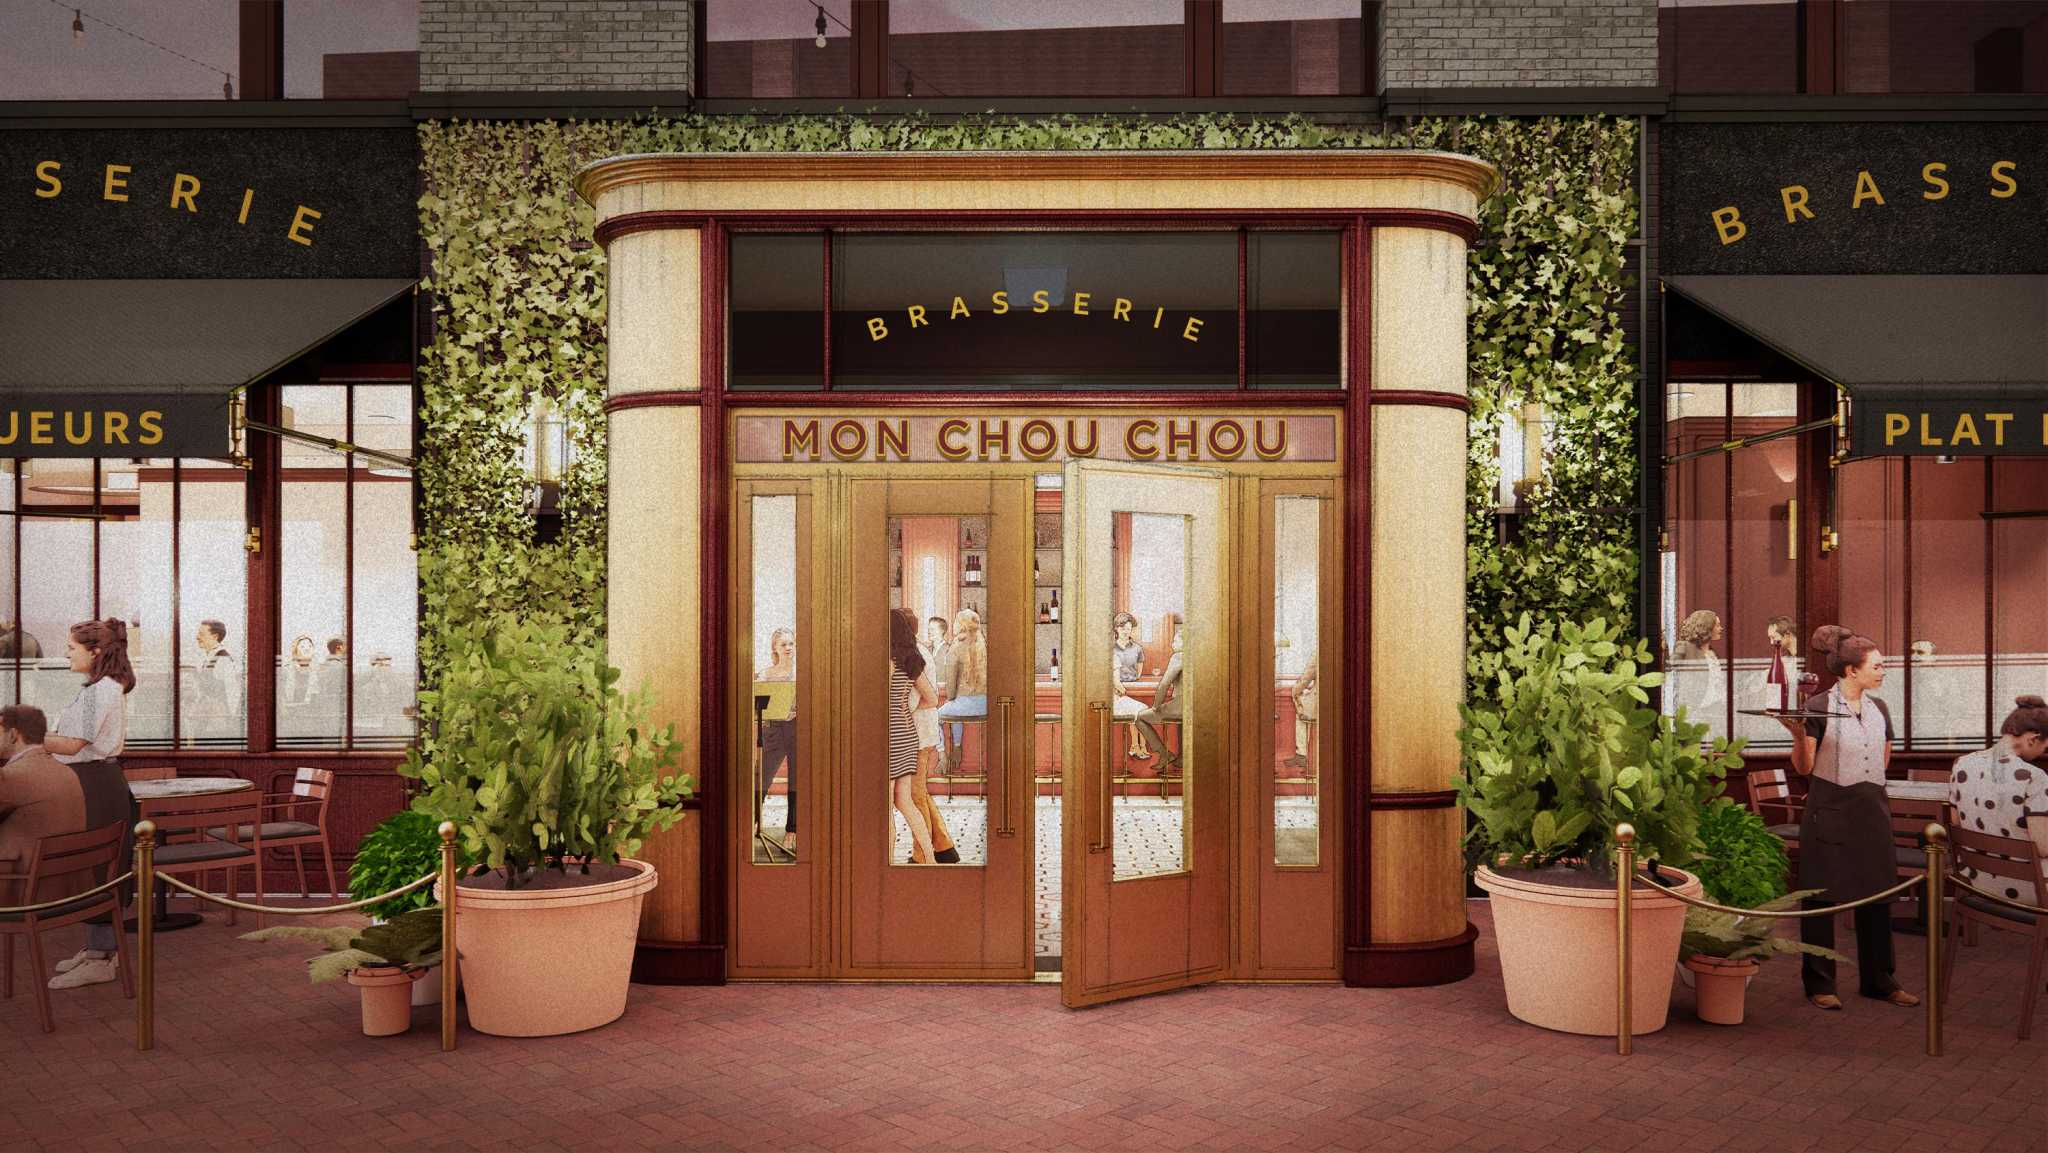 New French Restaurant Brasserie Mon Chou Chou To Open Soon At The Pearl In San Antonio